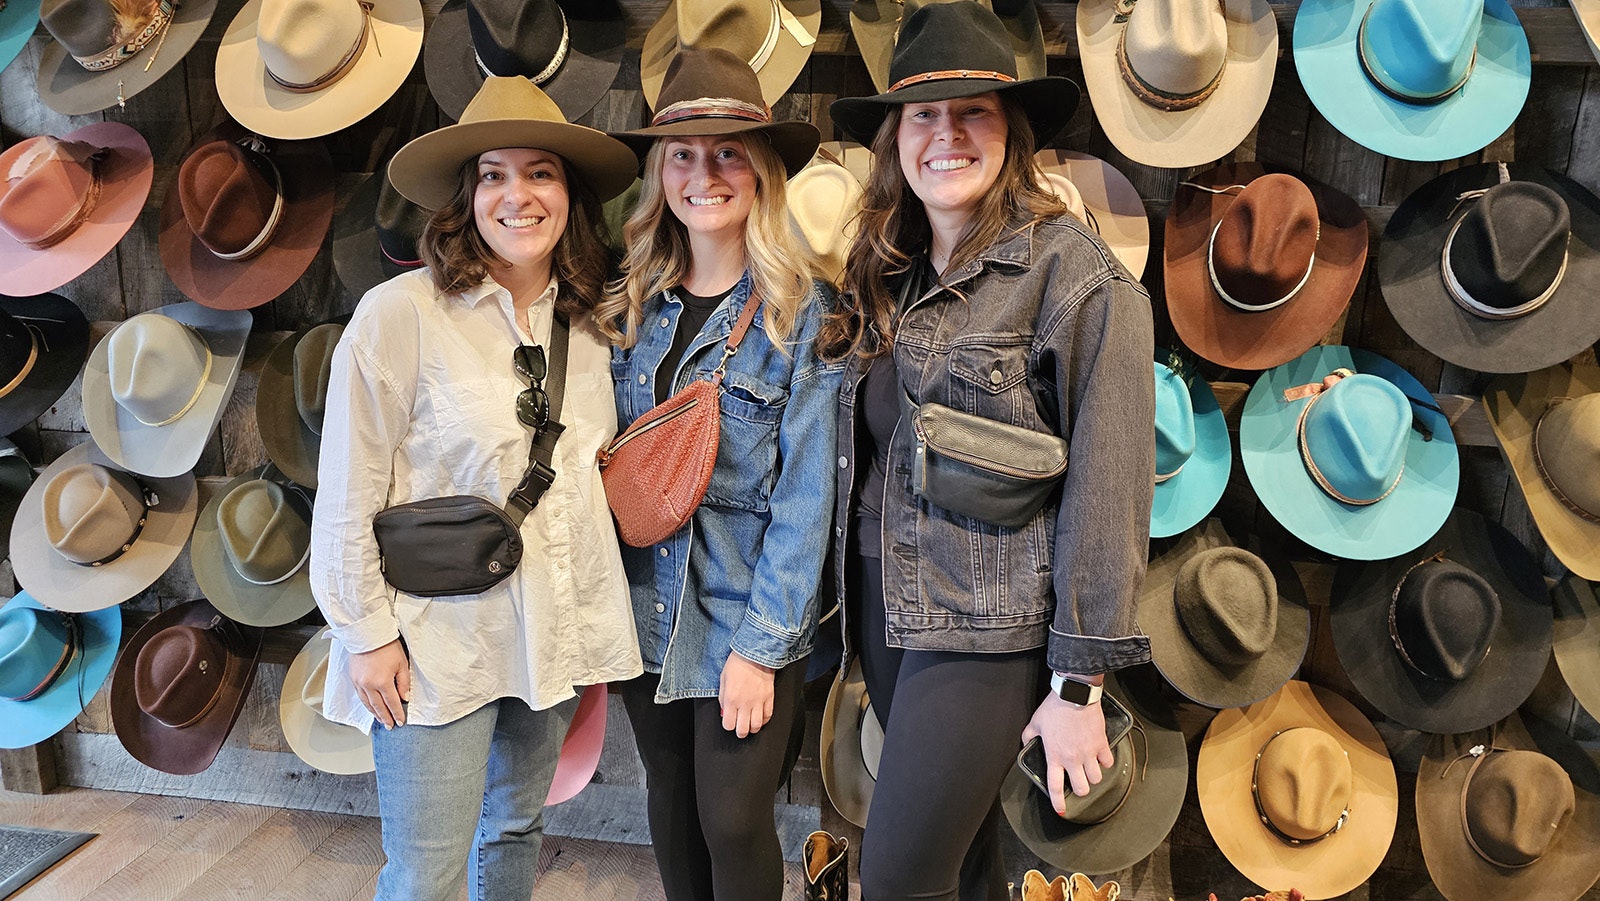 From left, Megan Prez, Anne Marie Cress, and Mary Sullivan were quite happy with their hats from Kemo Sabe.